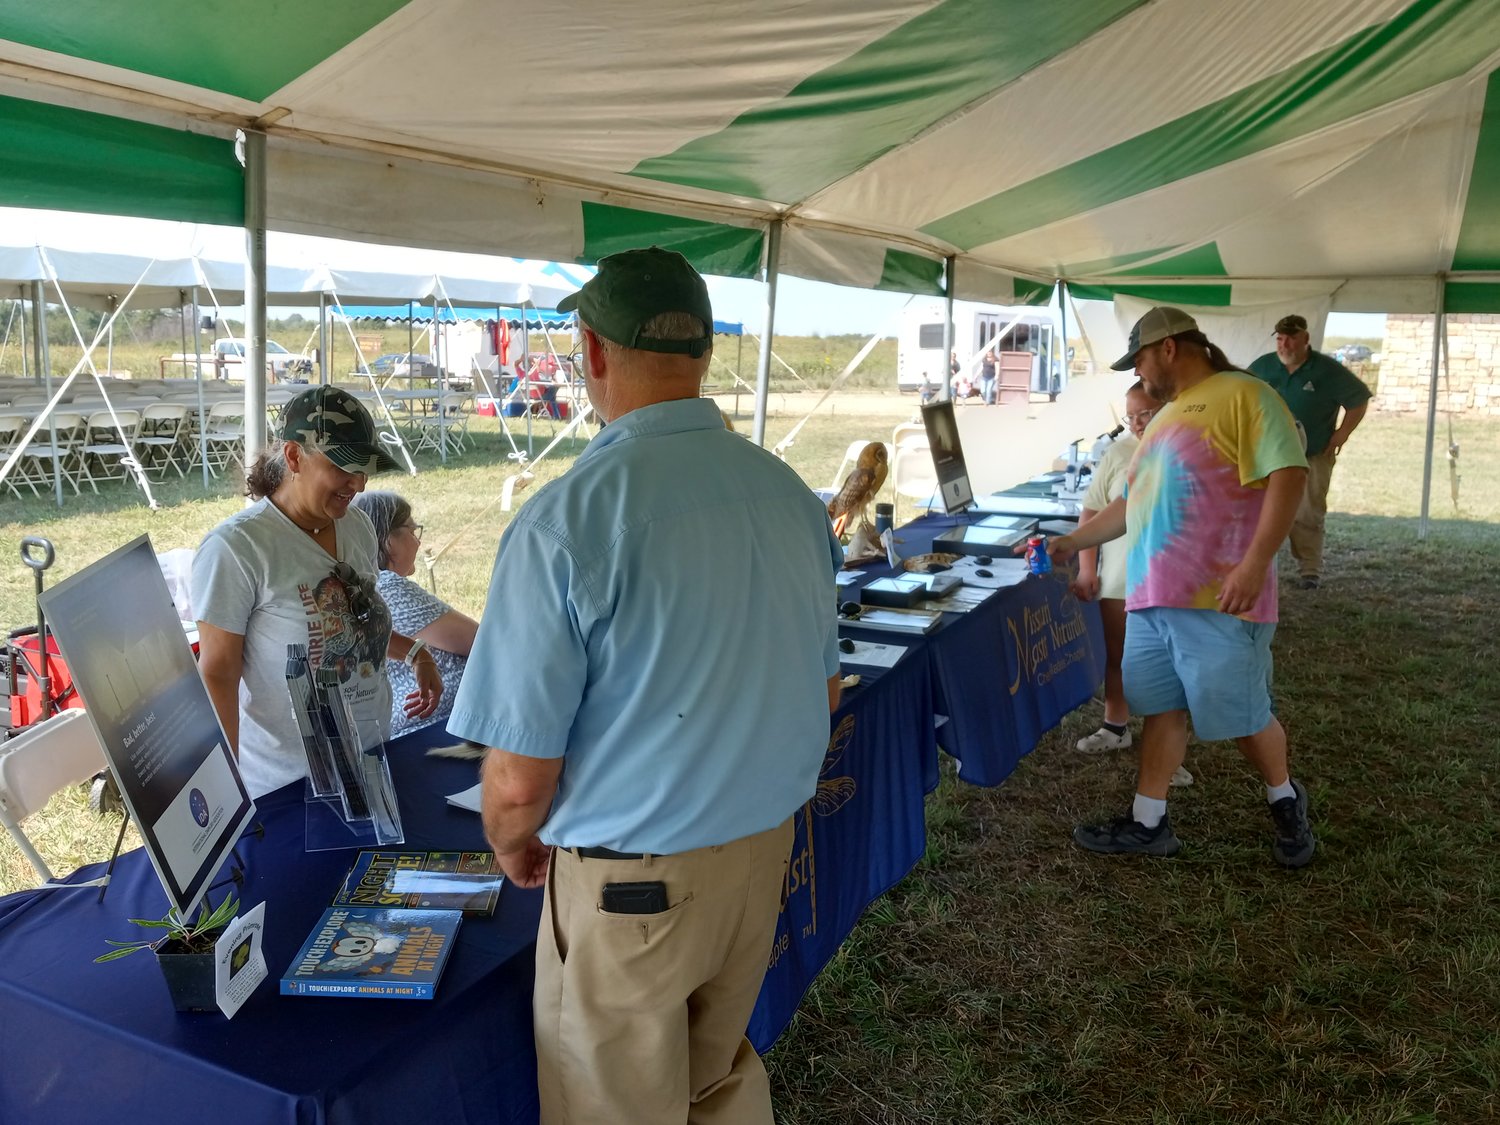 Exhibitors at the annual Prairie Jubilee on Saturday included several providing information about the wildlife of the tallgrass prairie ecosystem.